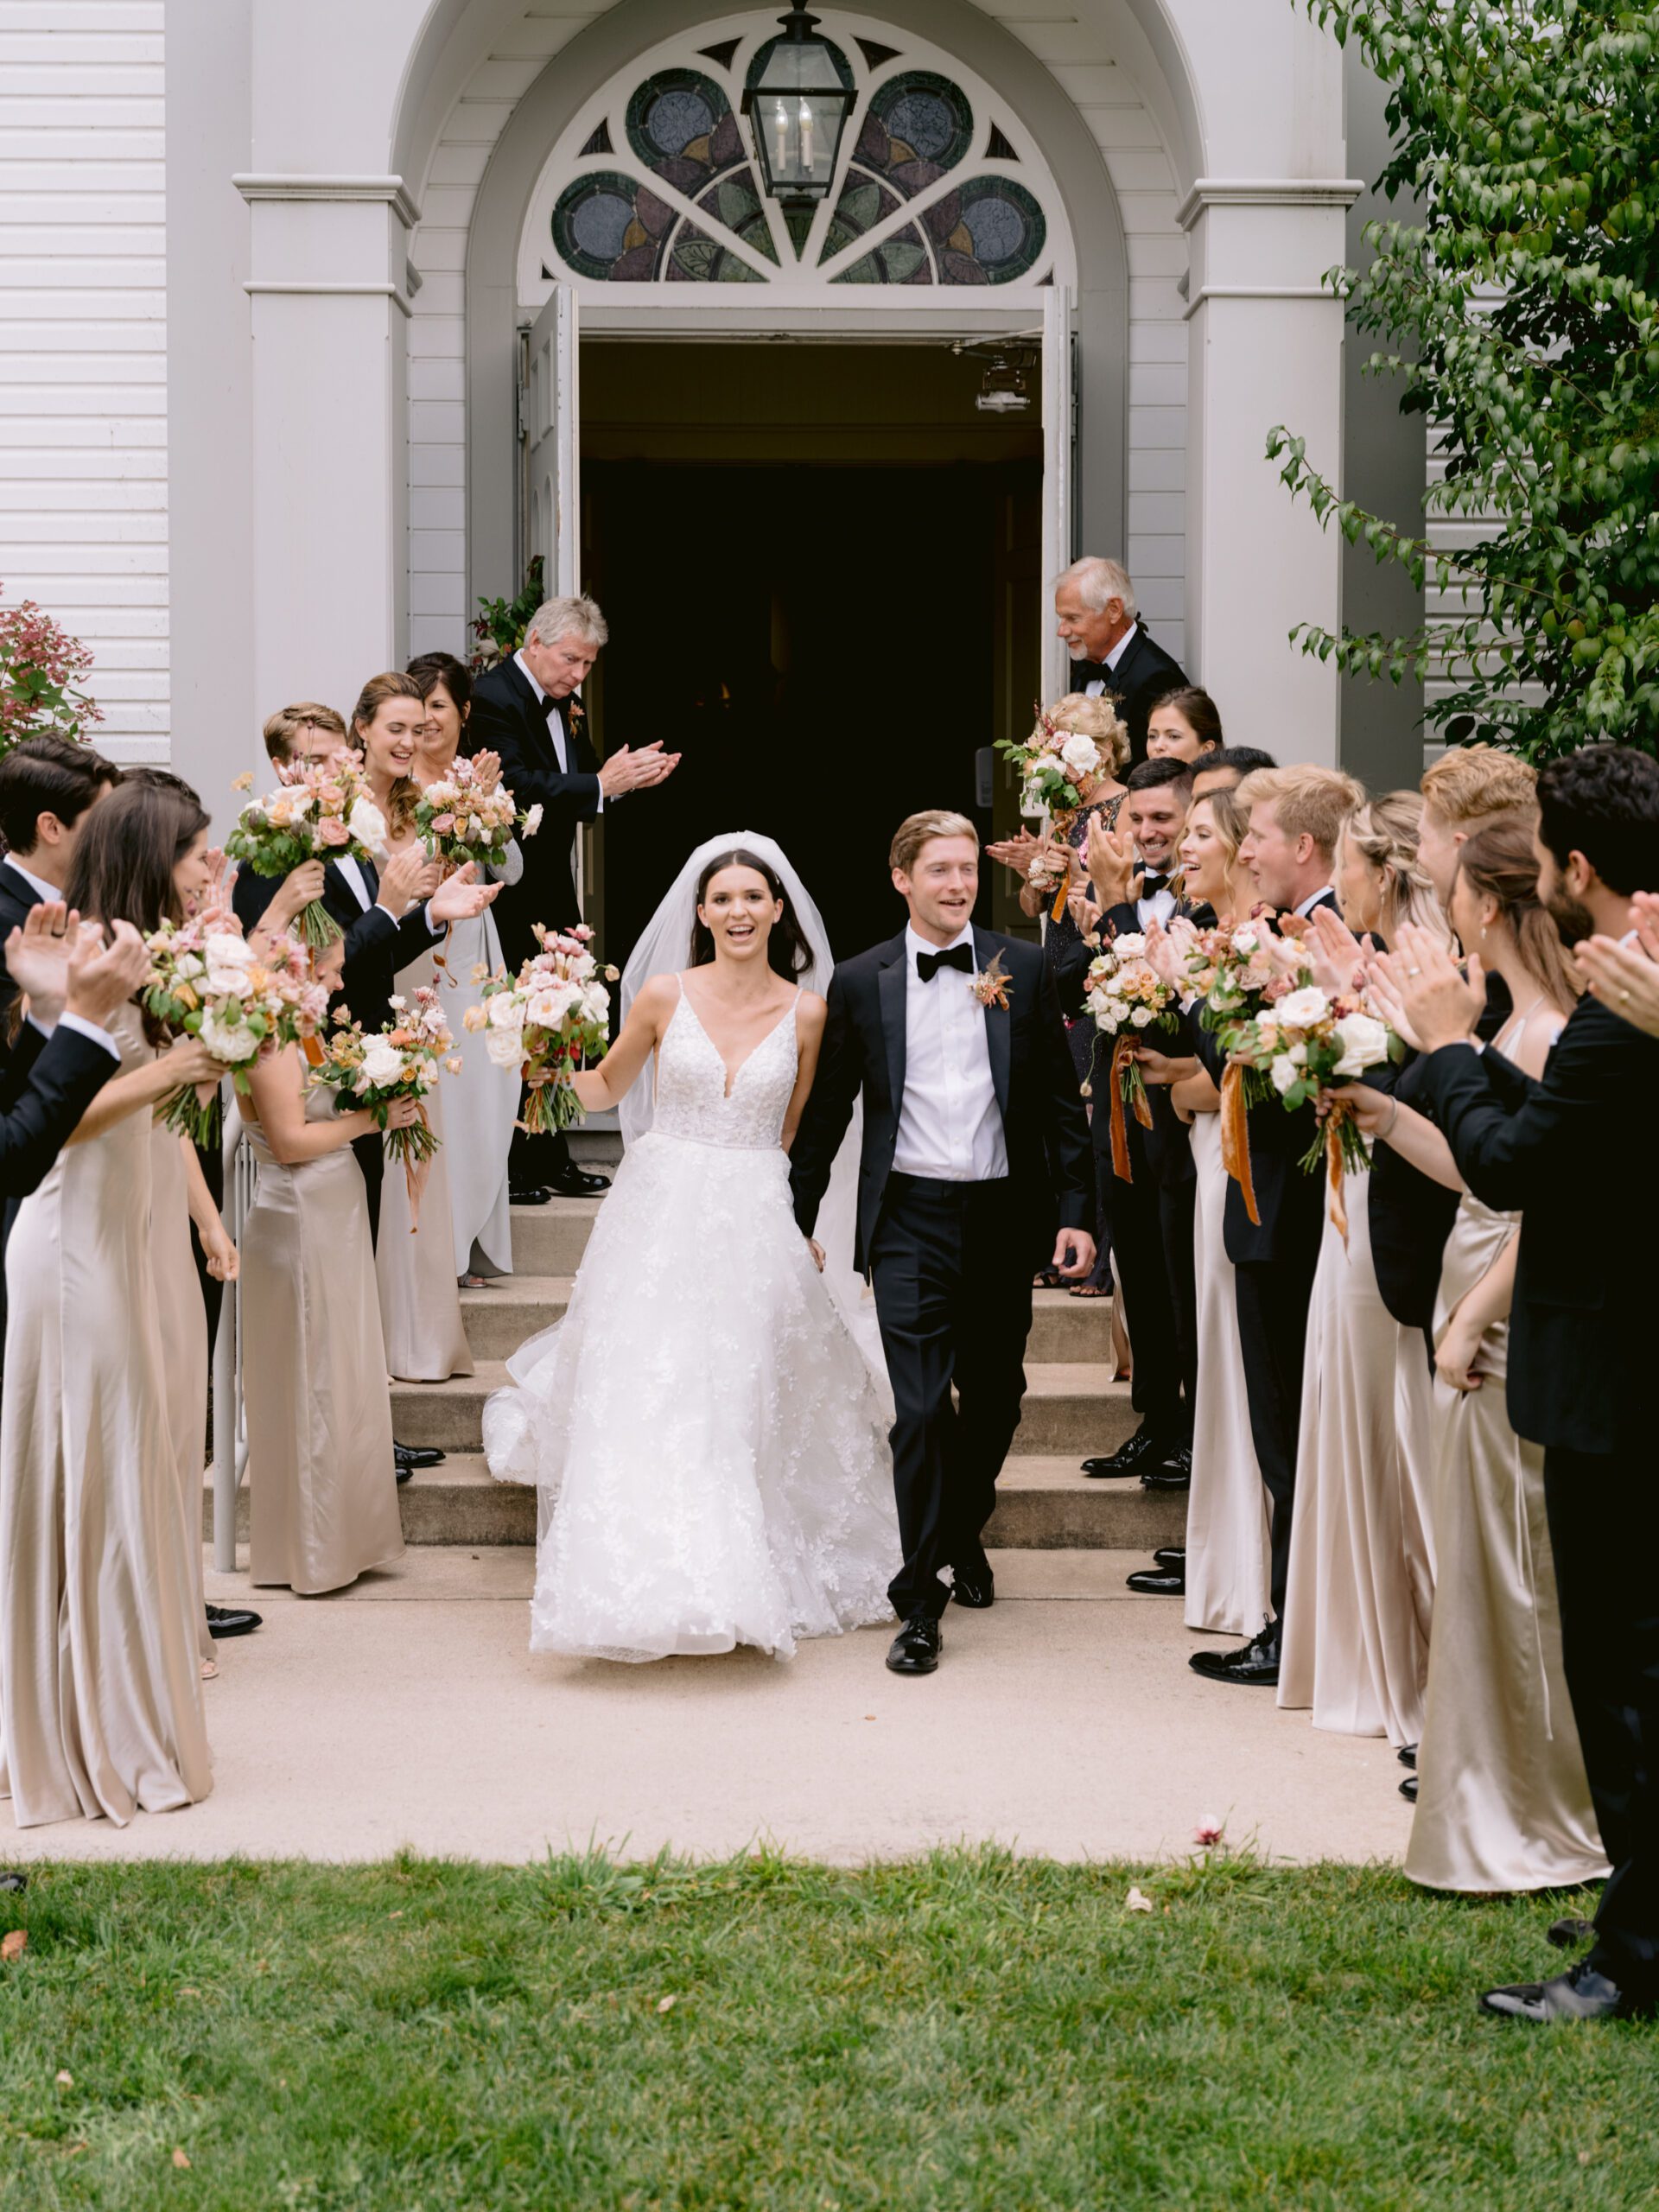 A bride and groom make a grand exit in this wedding photography